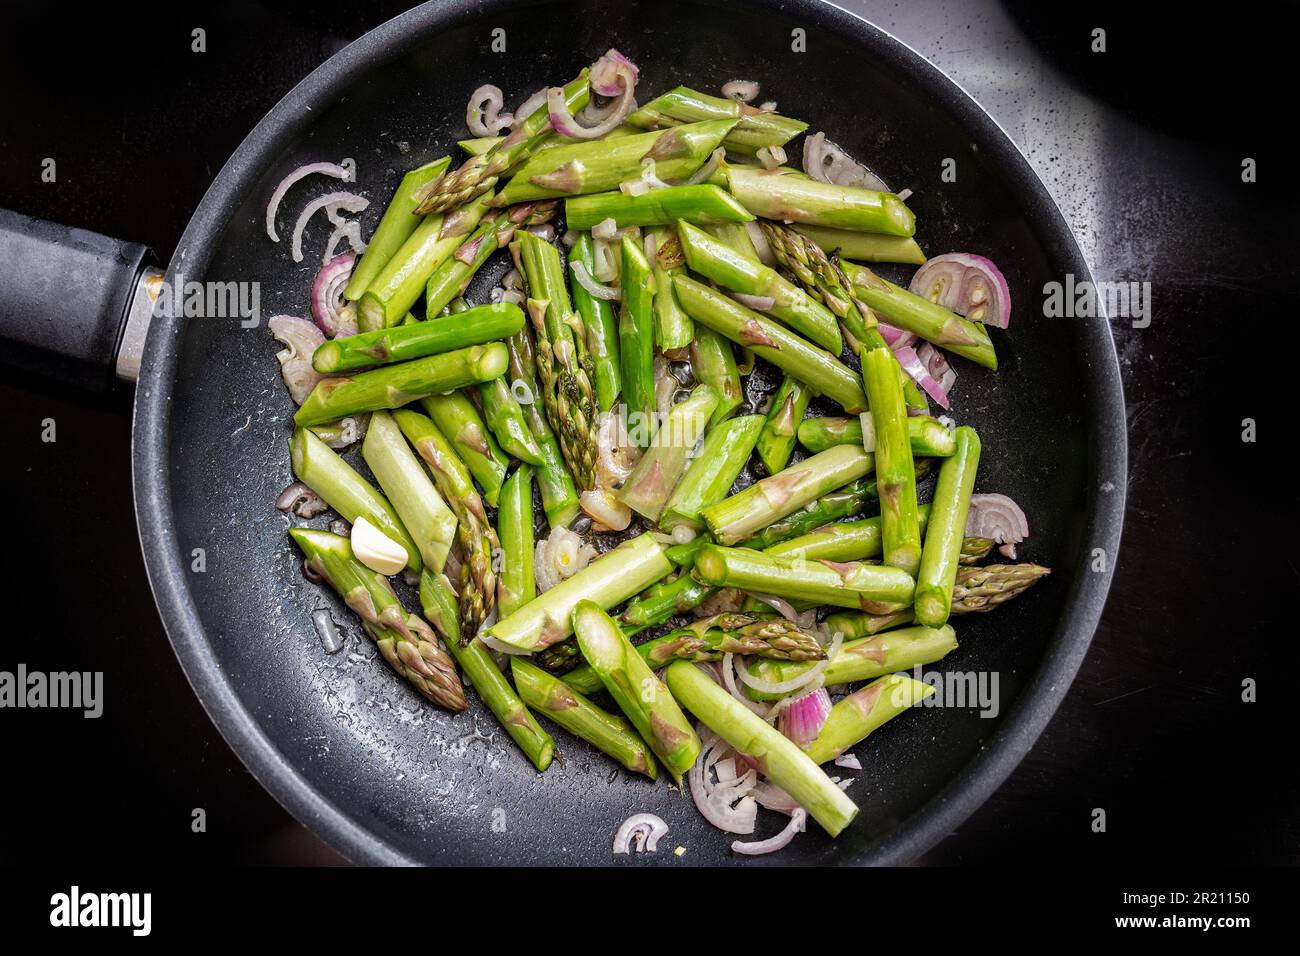 Green asparagus and red onion in a frying pan on the black stove top, cooking a healthy vegetarian meal with seasonal vegetables, high angle view from Stock Photo